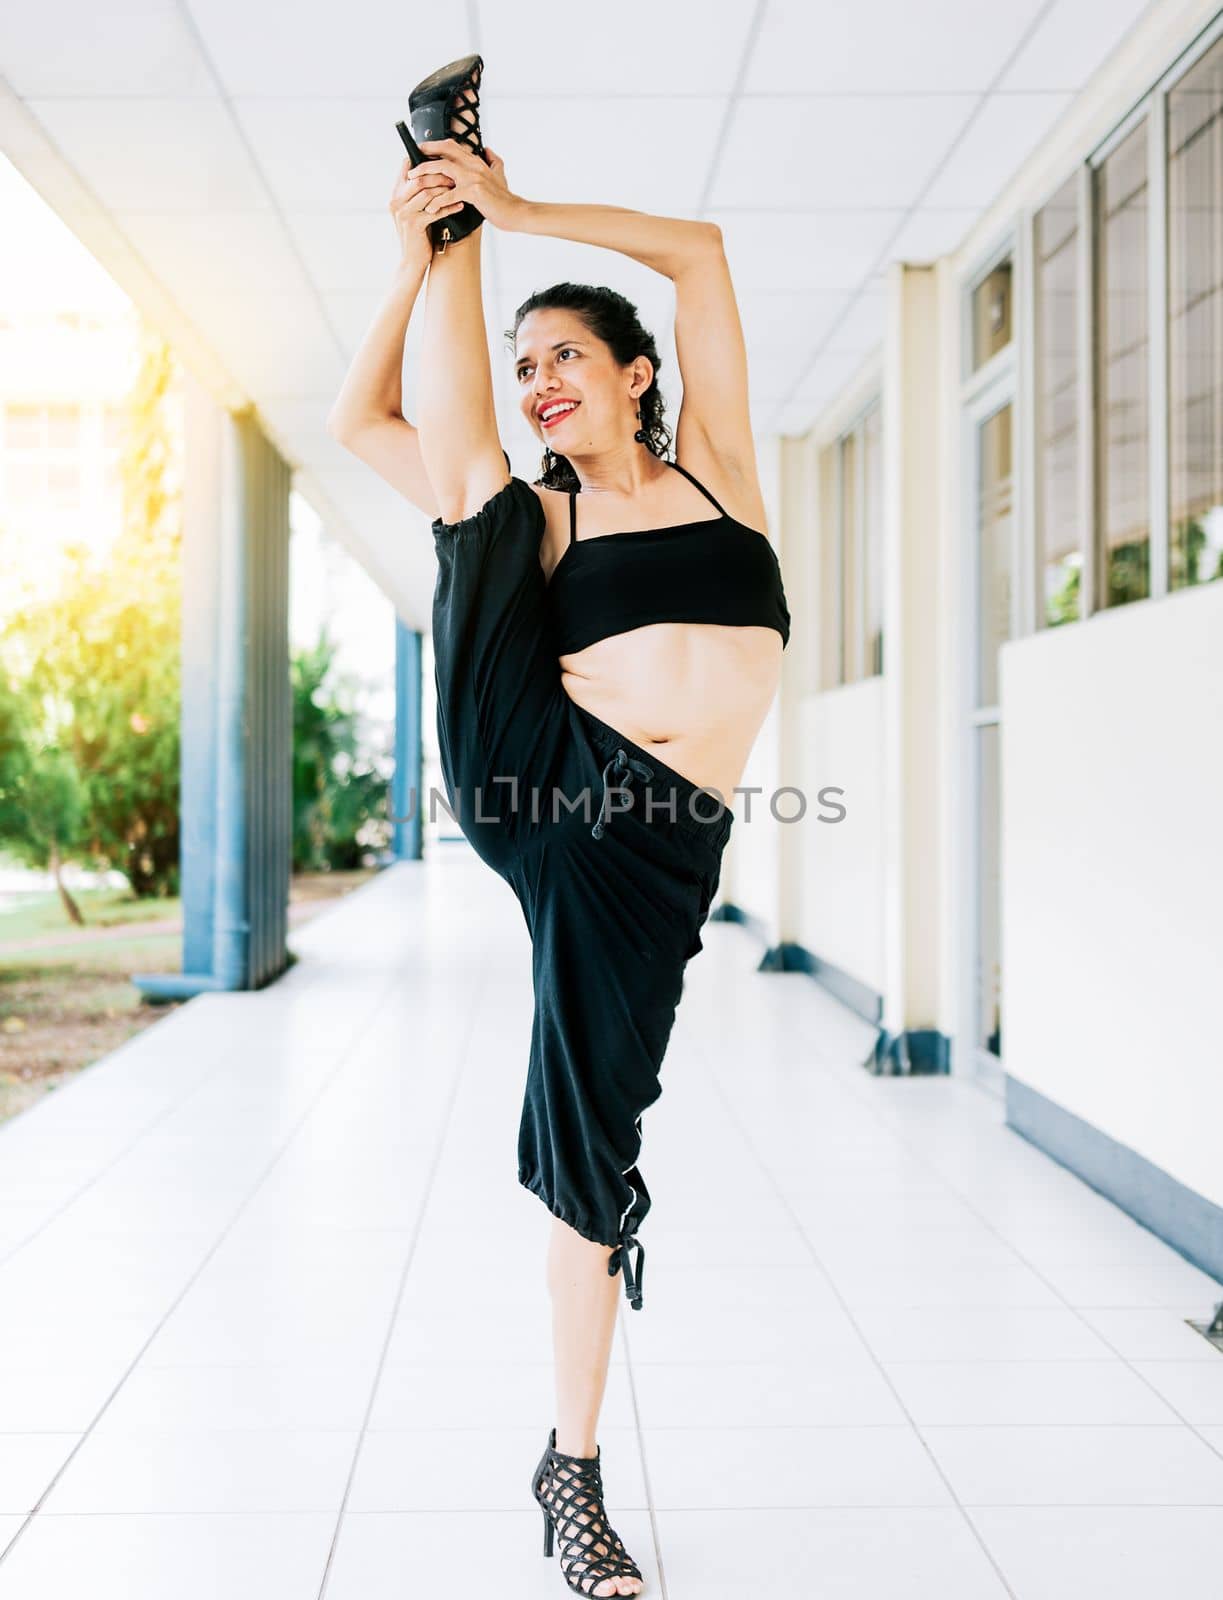 Woman dancer in heels doing yoga flexibilities. Dance artist woman doing acrobatics and flexibilities in heels. Artistic gymnastics concept, Dance girl doing flexibility in high heels by isaiphoto